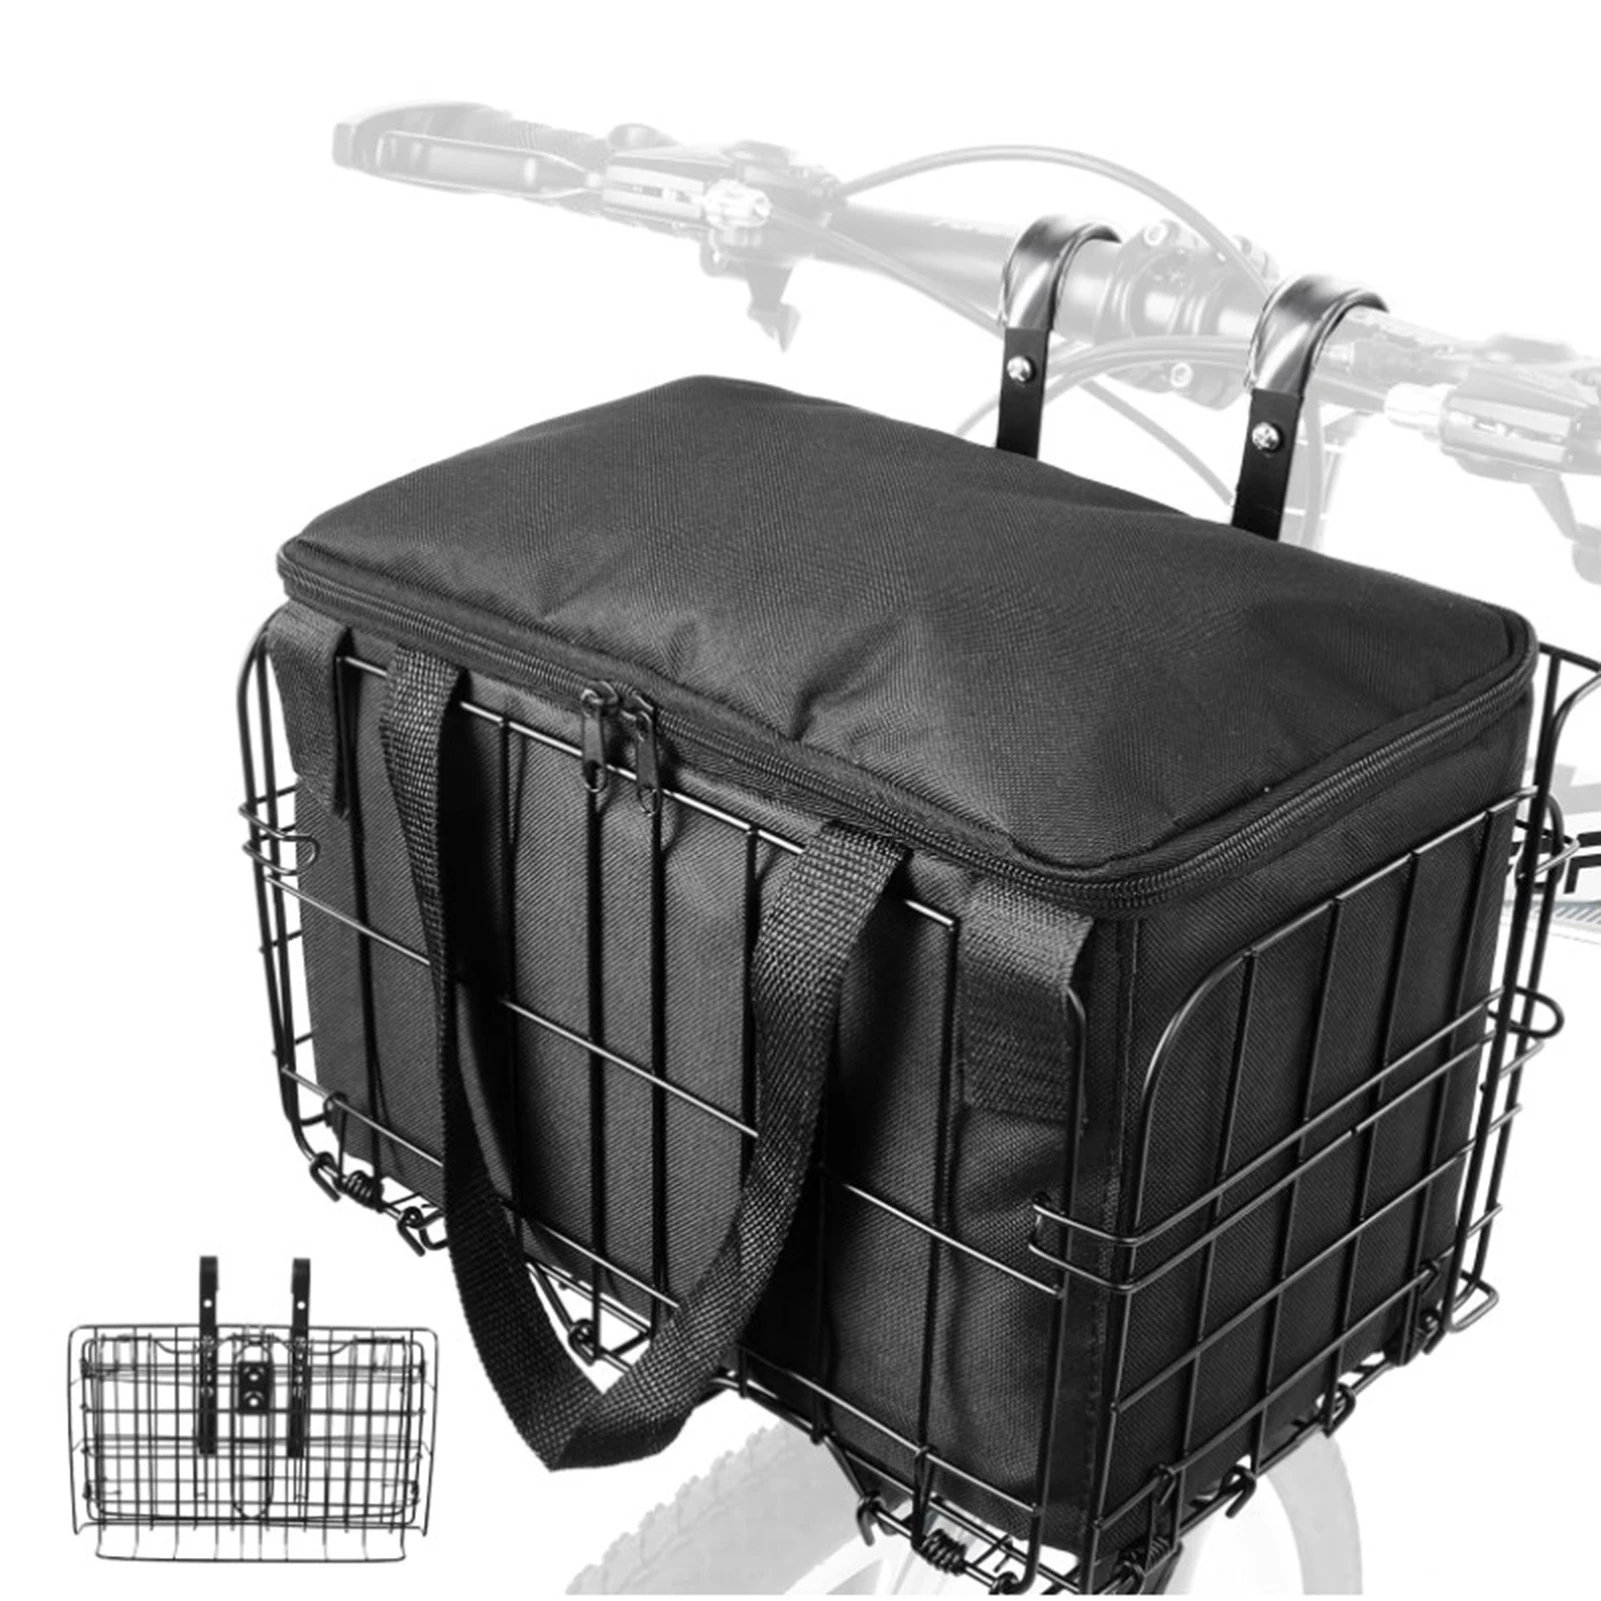 

Front/Rear Bike Basket Bag Heavy Duty Metal Rear Bicycle Basket Bags Suitable for Carrying Dogs Pets